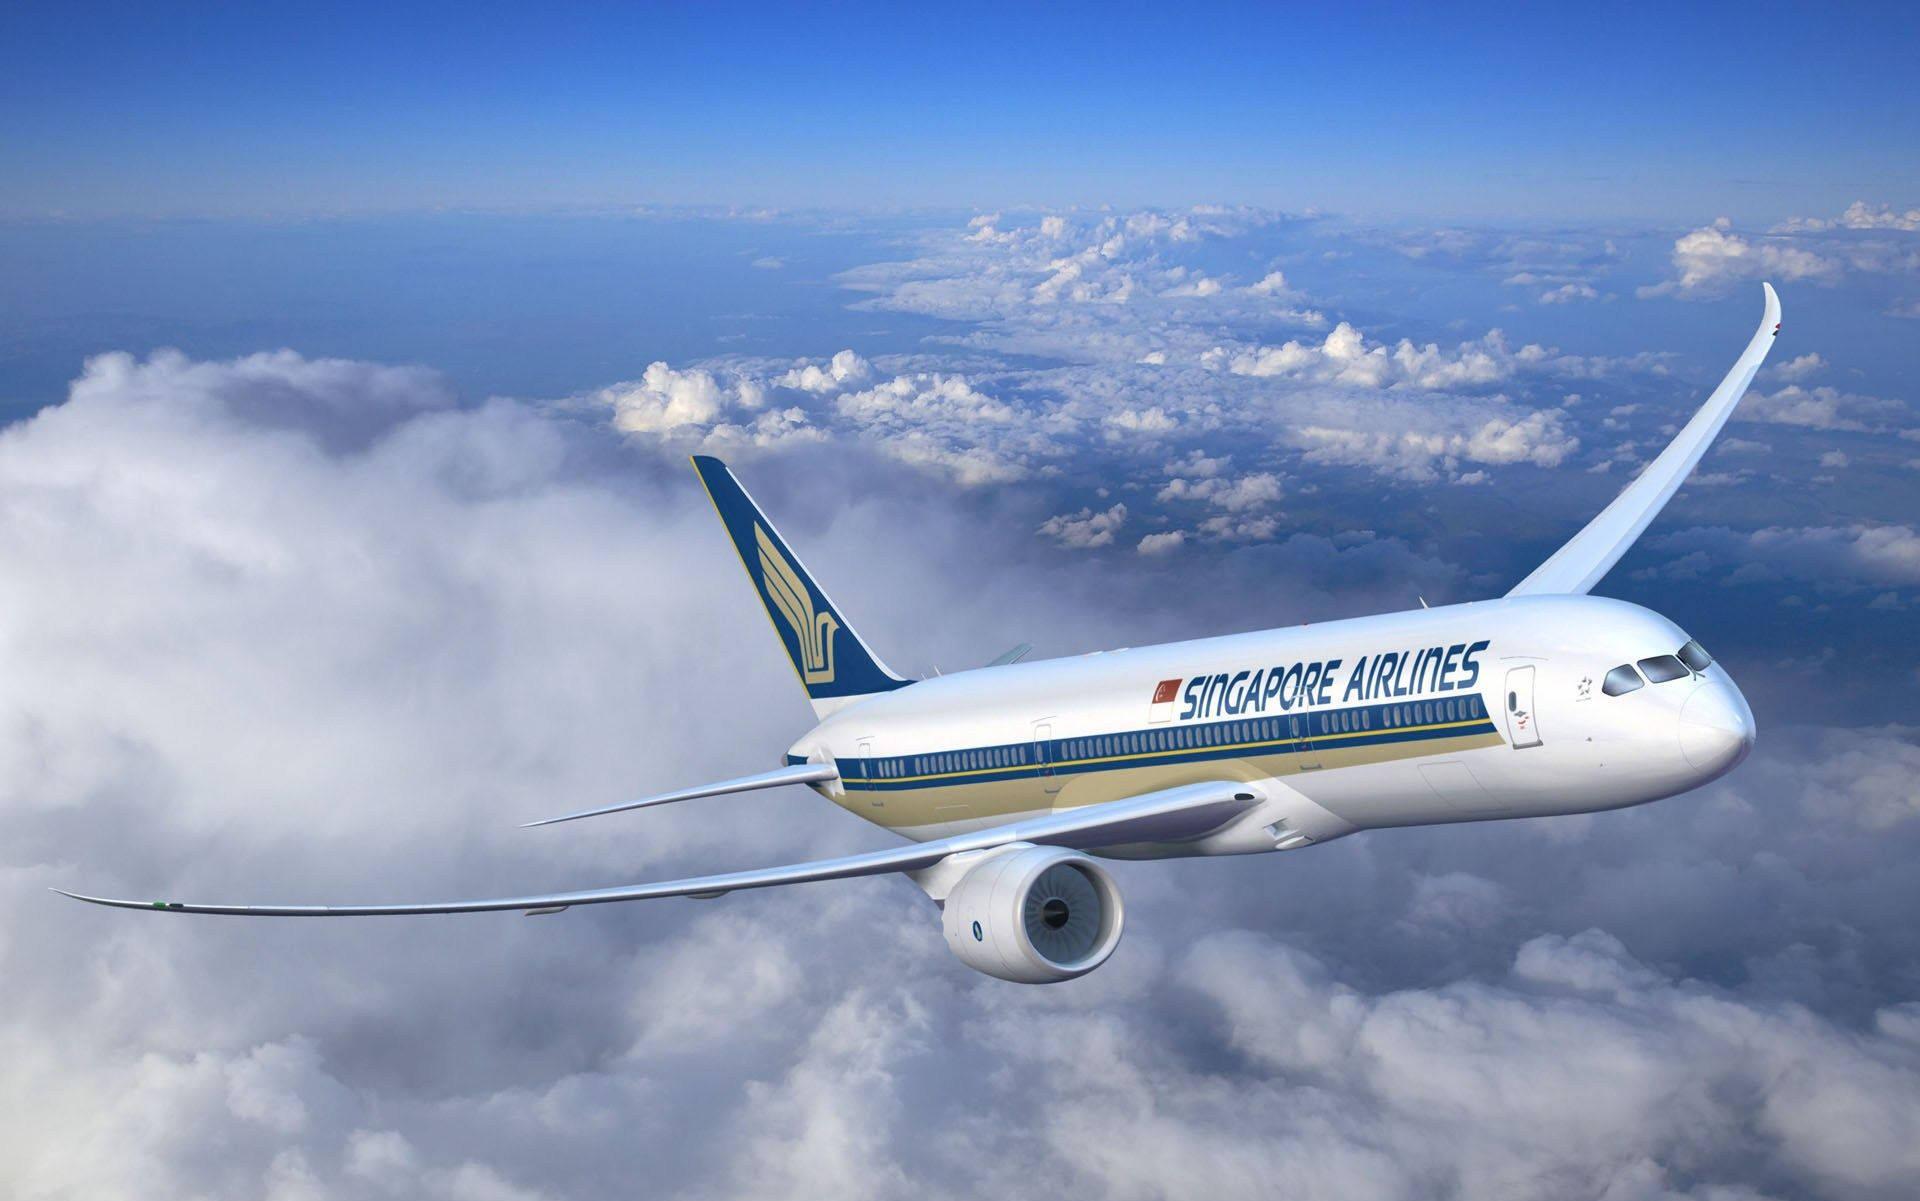 Singapore Airlines Pictures Wallpaper